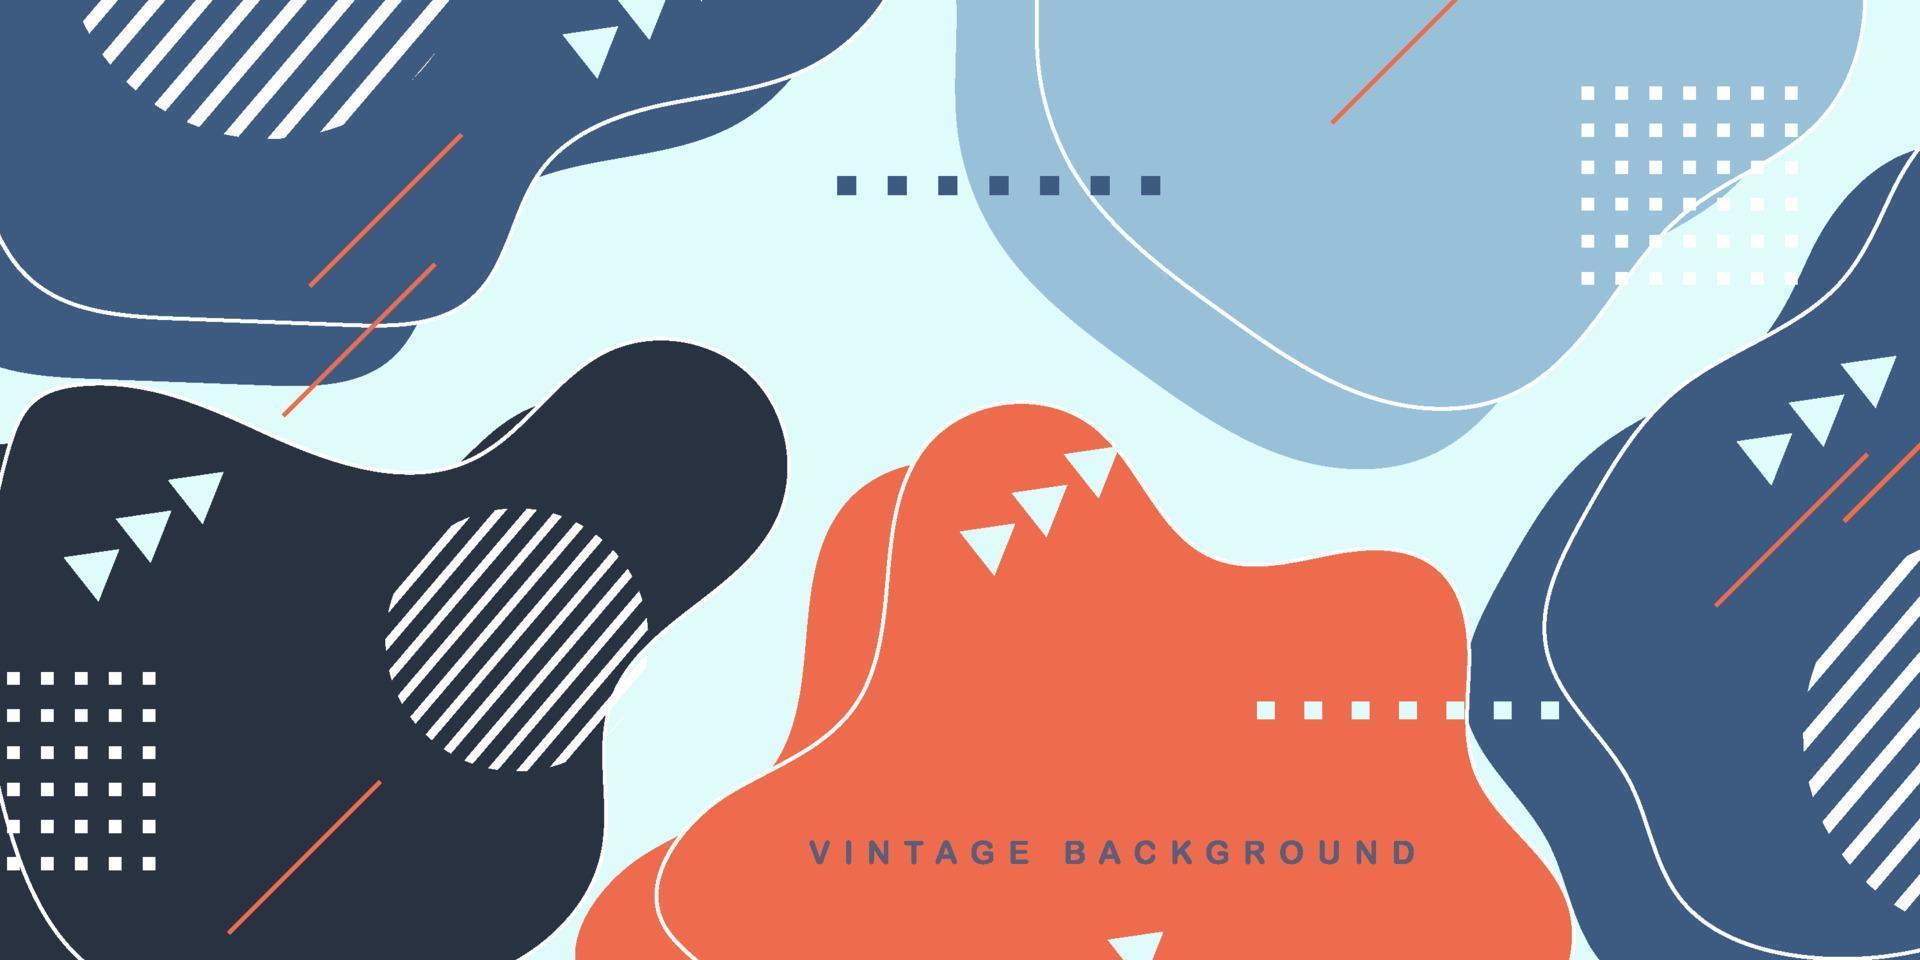 Minimal background abstract shapes in blue orange black color. Contemporary collage. Design for flyers, greeting cards, packaging, branding and wedding invitations.Eps10 Vector